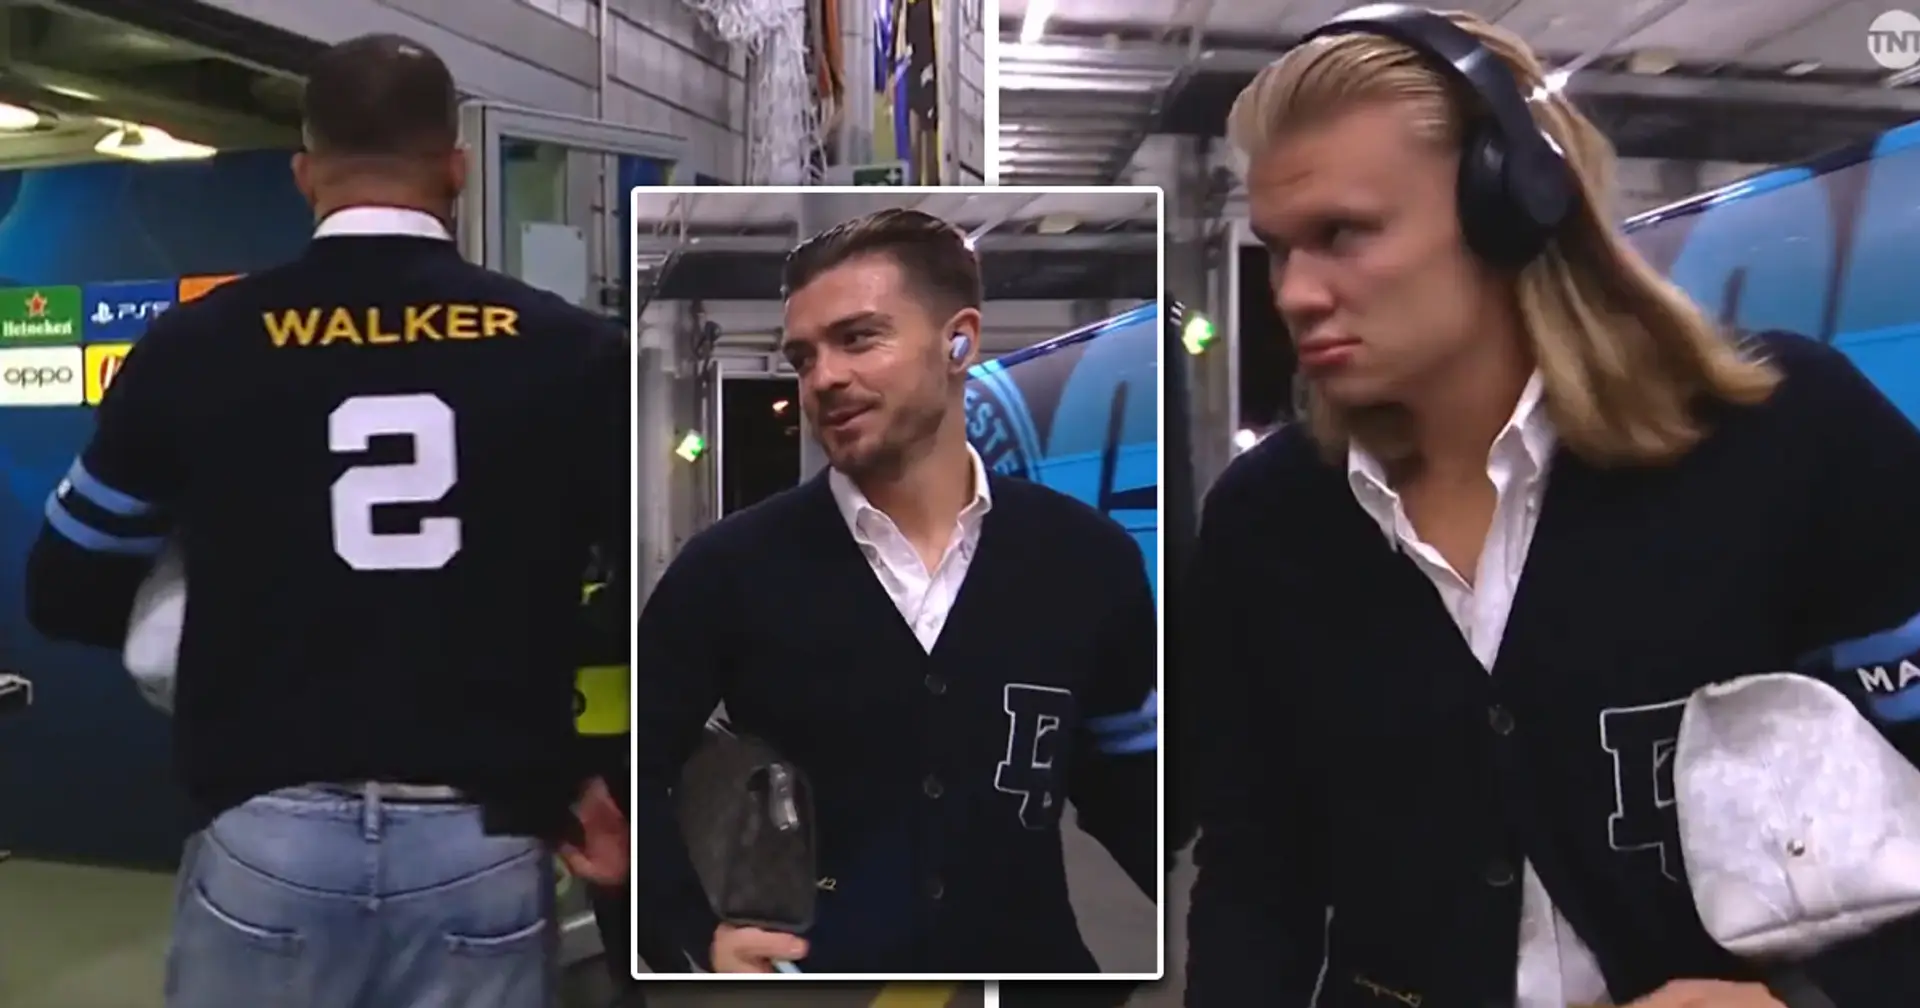 'Add that to their 115 charges': Football fans mock Man City players for their cardigans